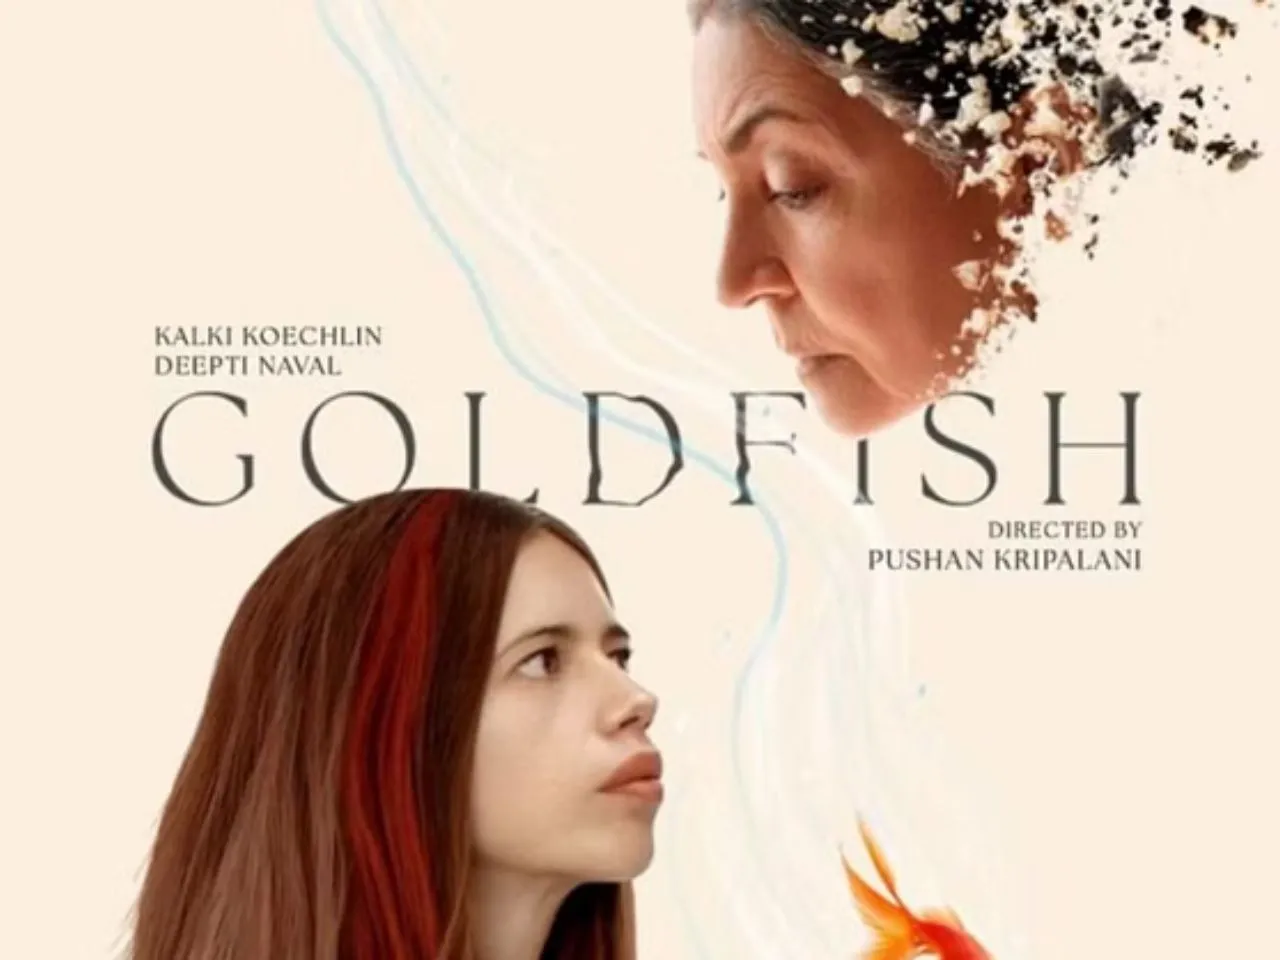 Goldfish review: Of a mother and daughter's overwhelming love, pain, and redemption